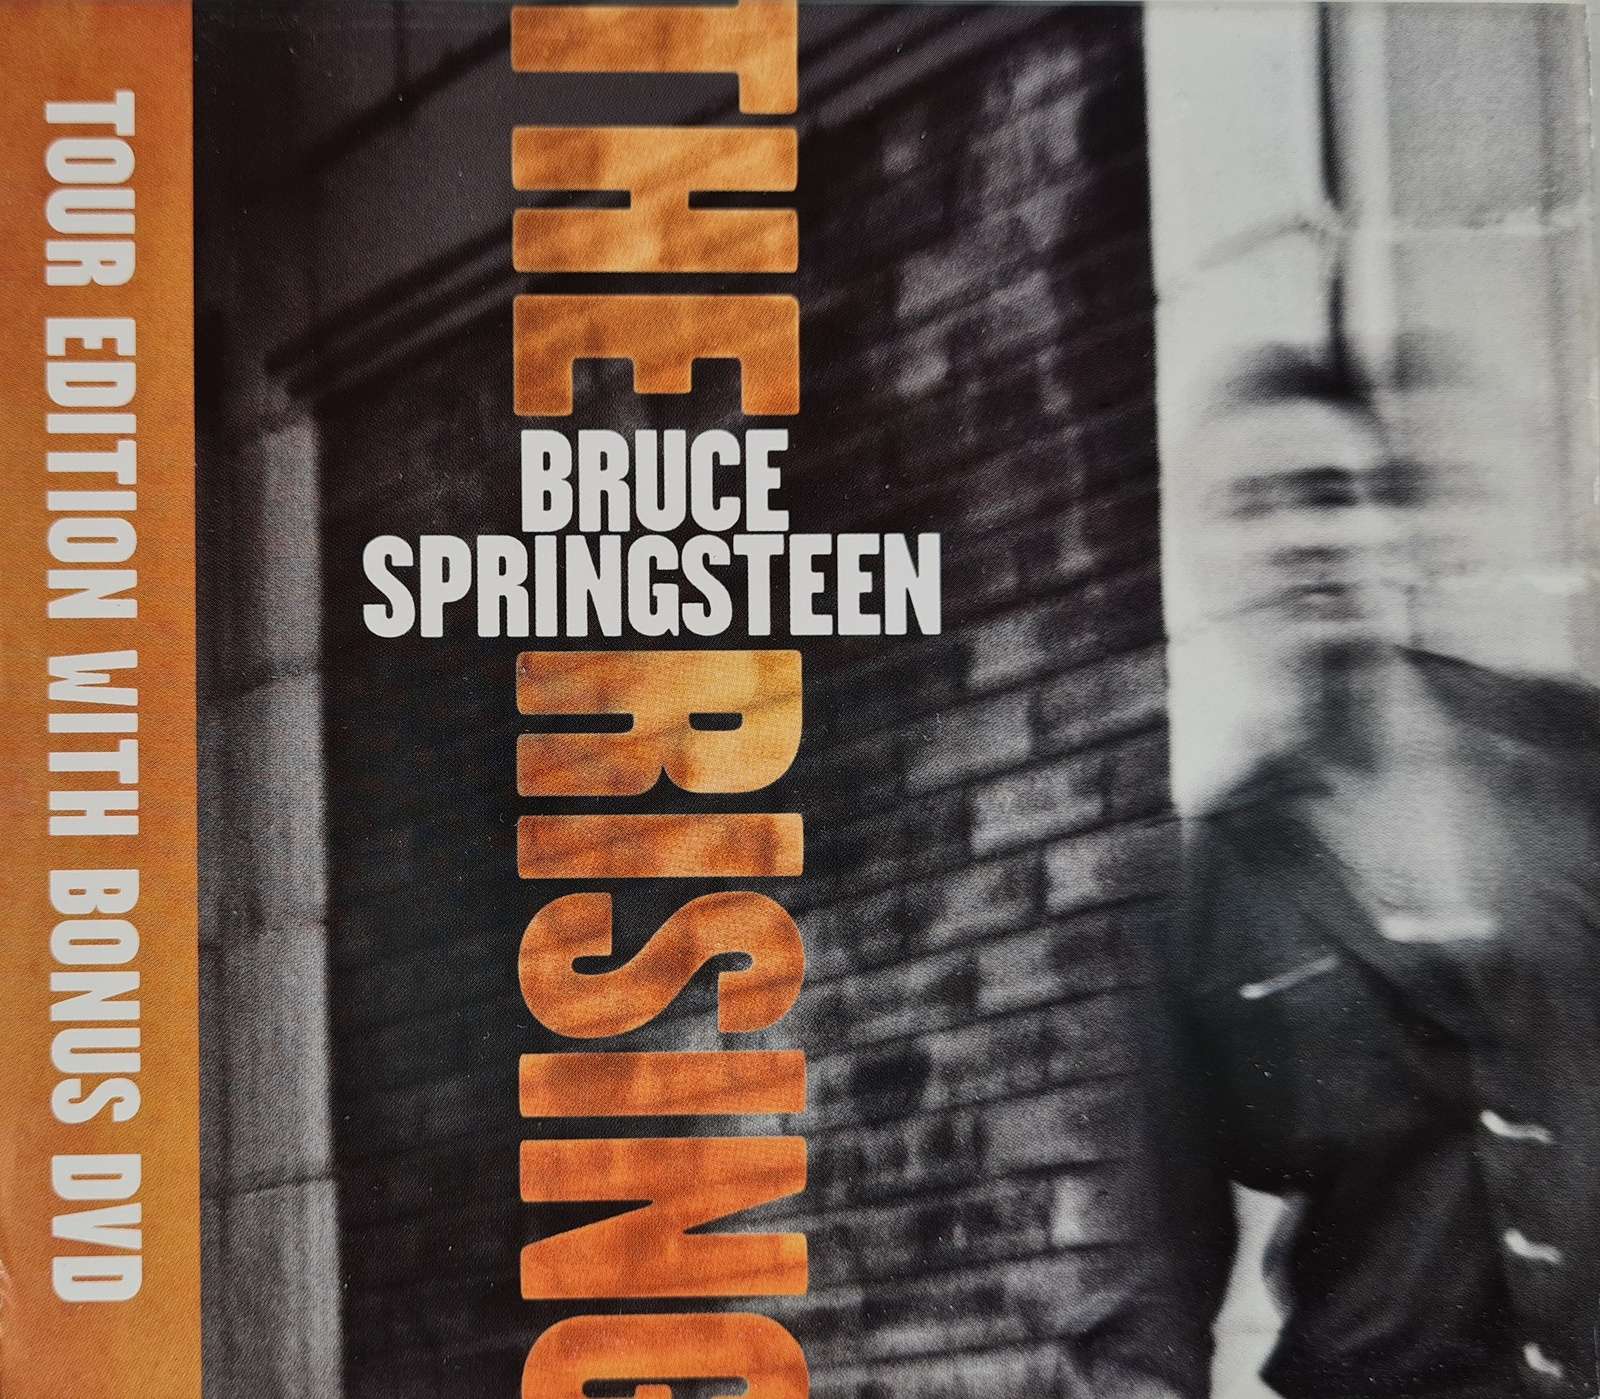 Bruce Springsteen - The Rising - Tour Edition (CD) with Bonus DVD